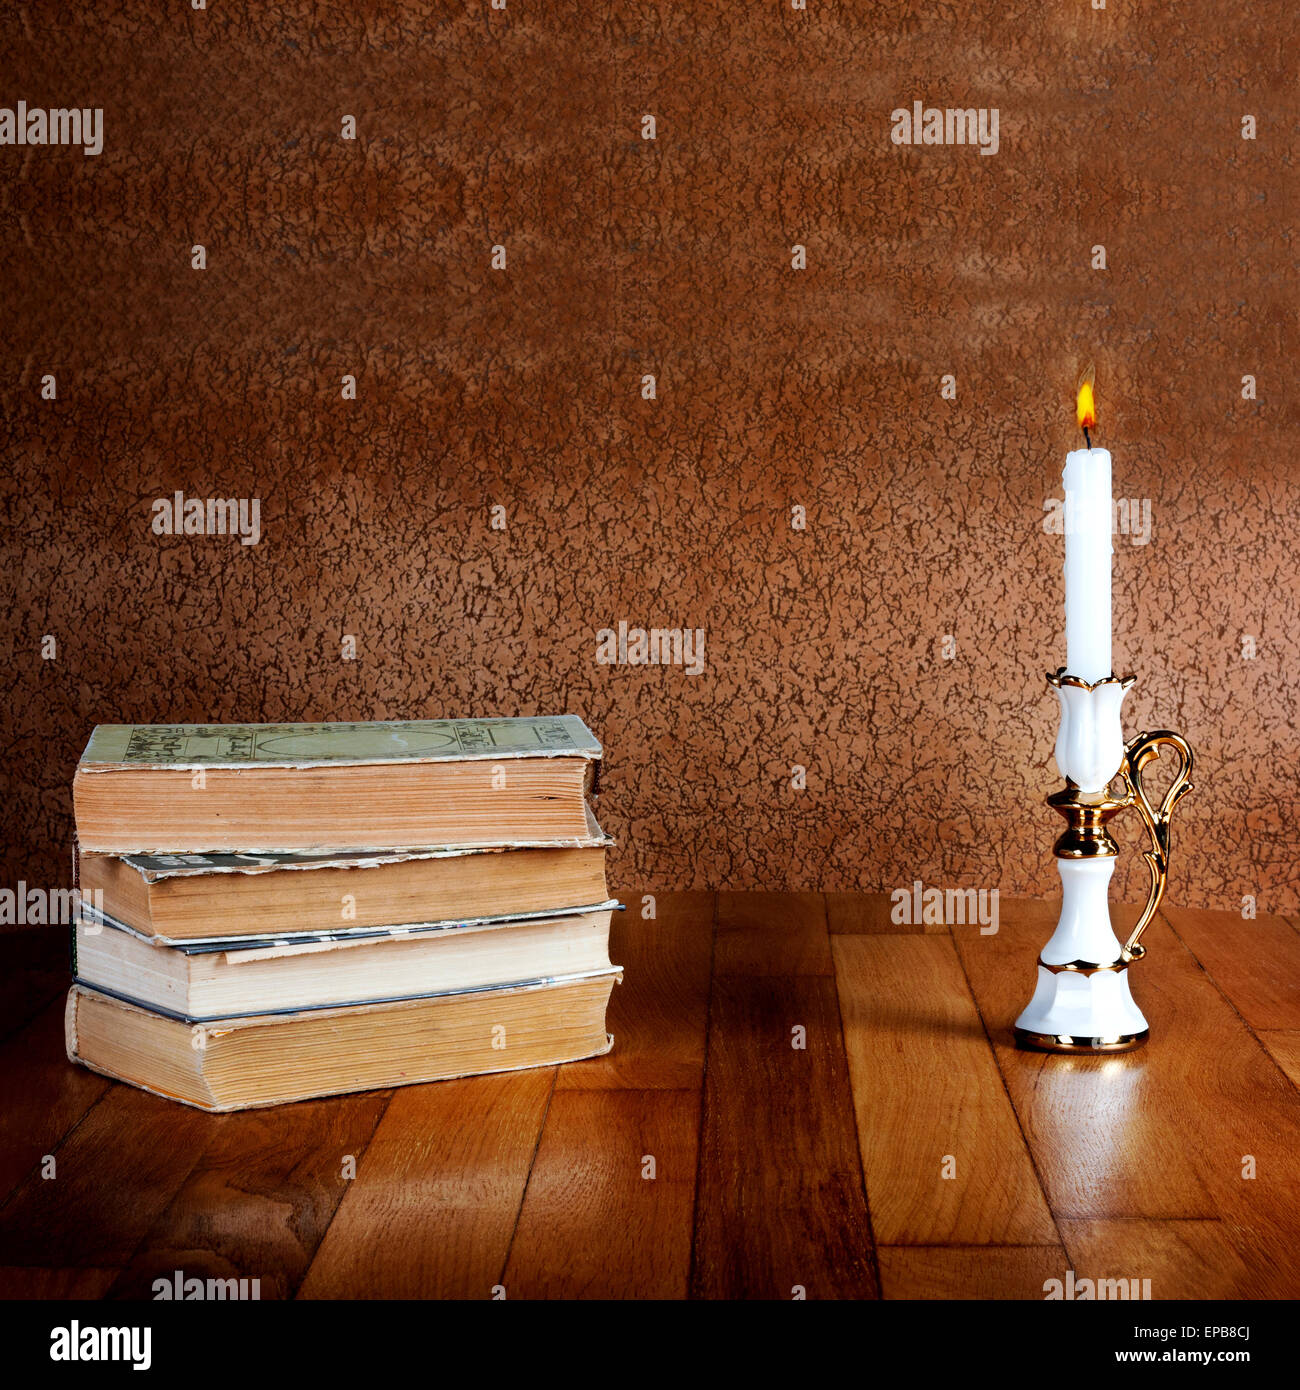 Old stack of books with candlestick and burning candle on the wooden table Stock Photo